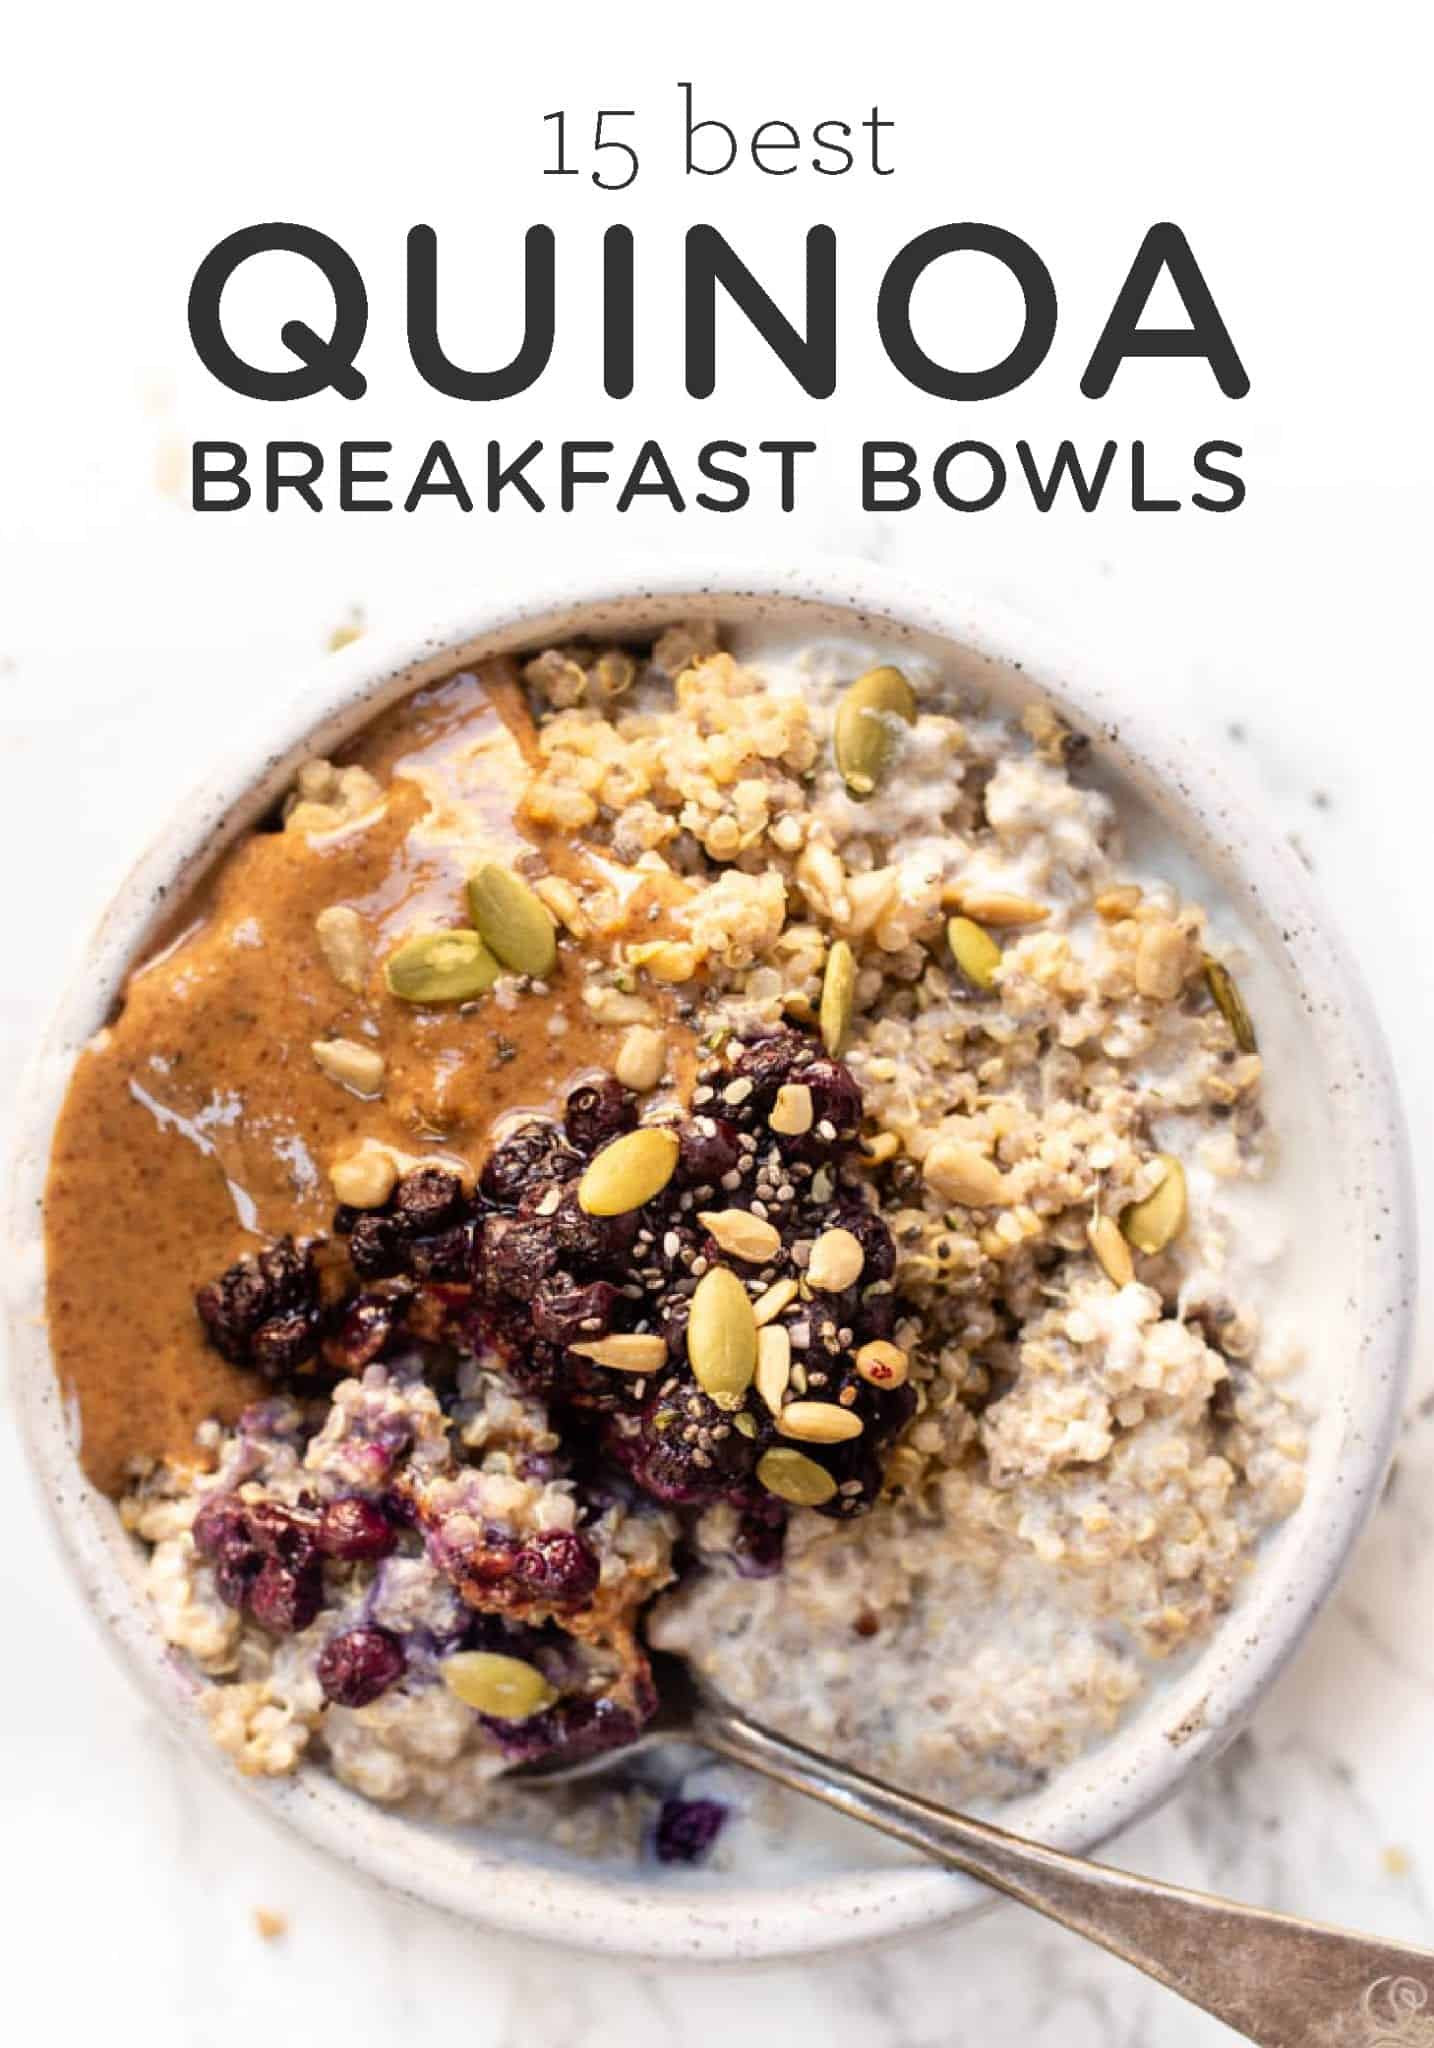 20 Ideas for Quinoa for Breakfast - Best Recipes Ideas and Collections